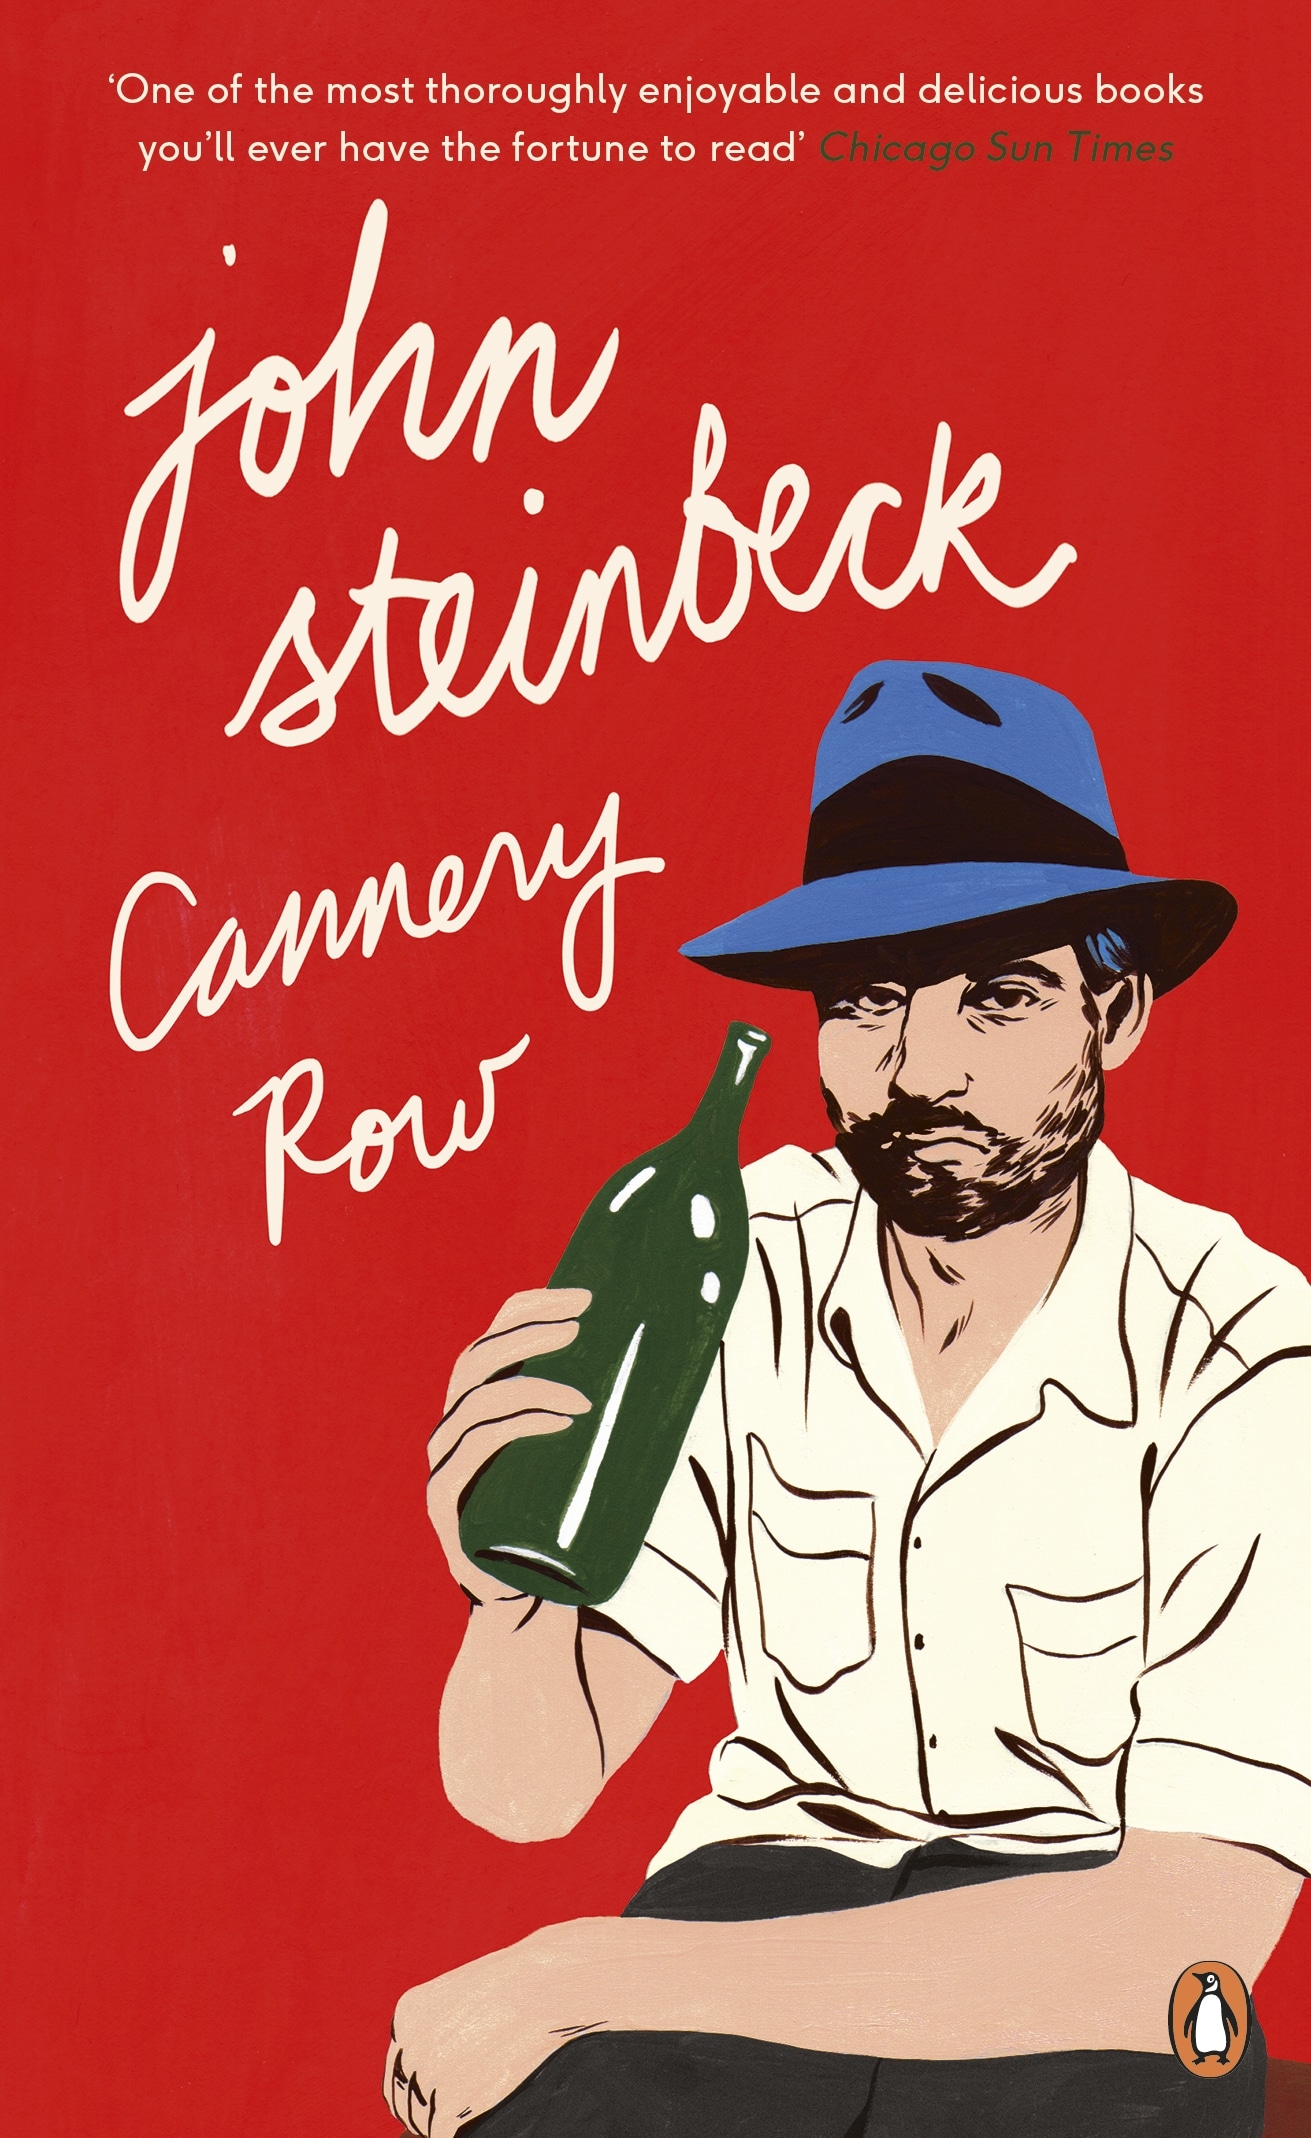 Book “Cannery Row” by John Steinbeck — July 6, 2017